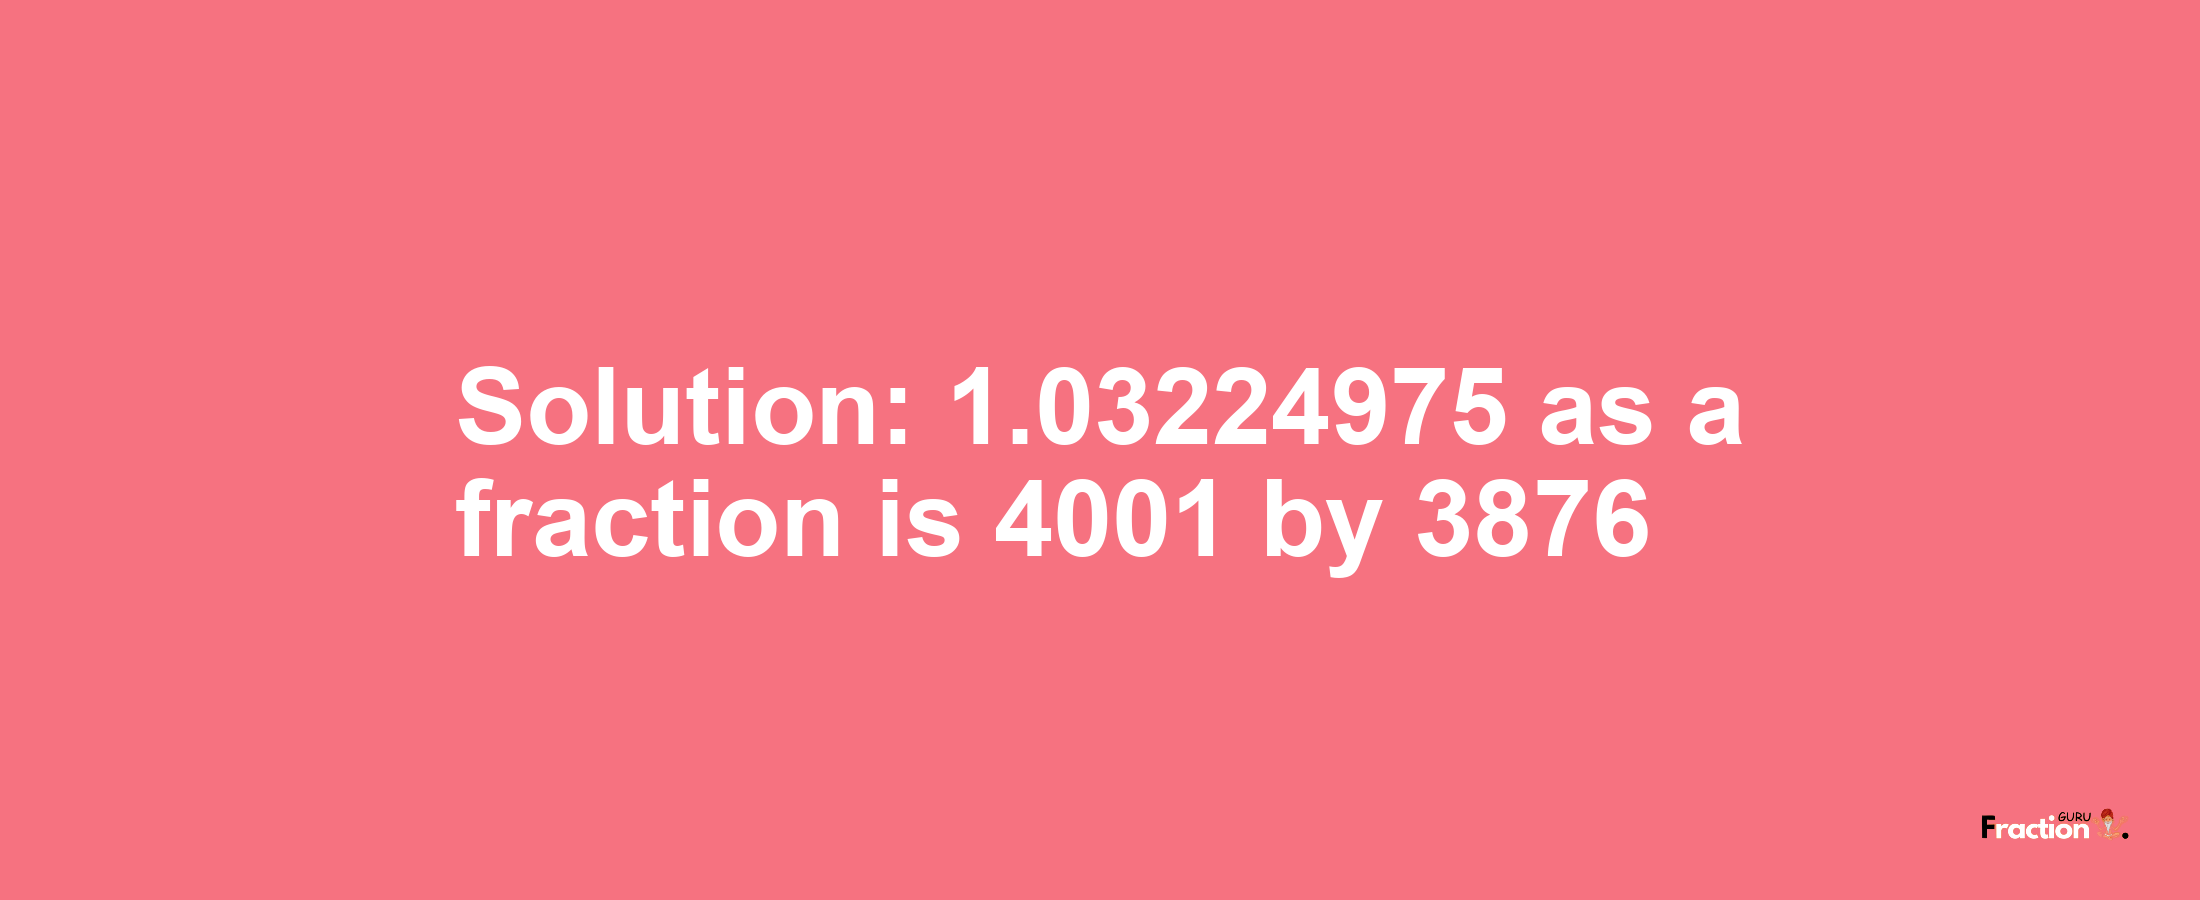 Solution:1.03224975 as a fraction is 4001/3876